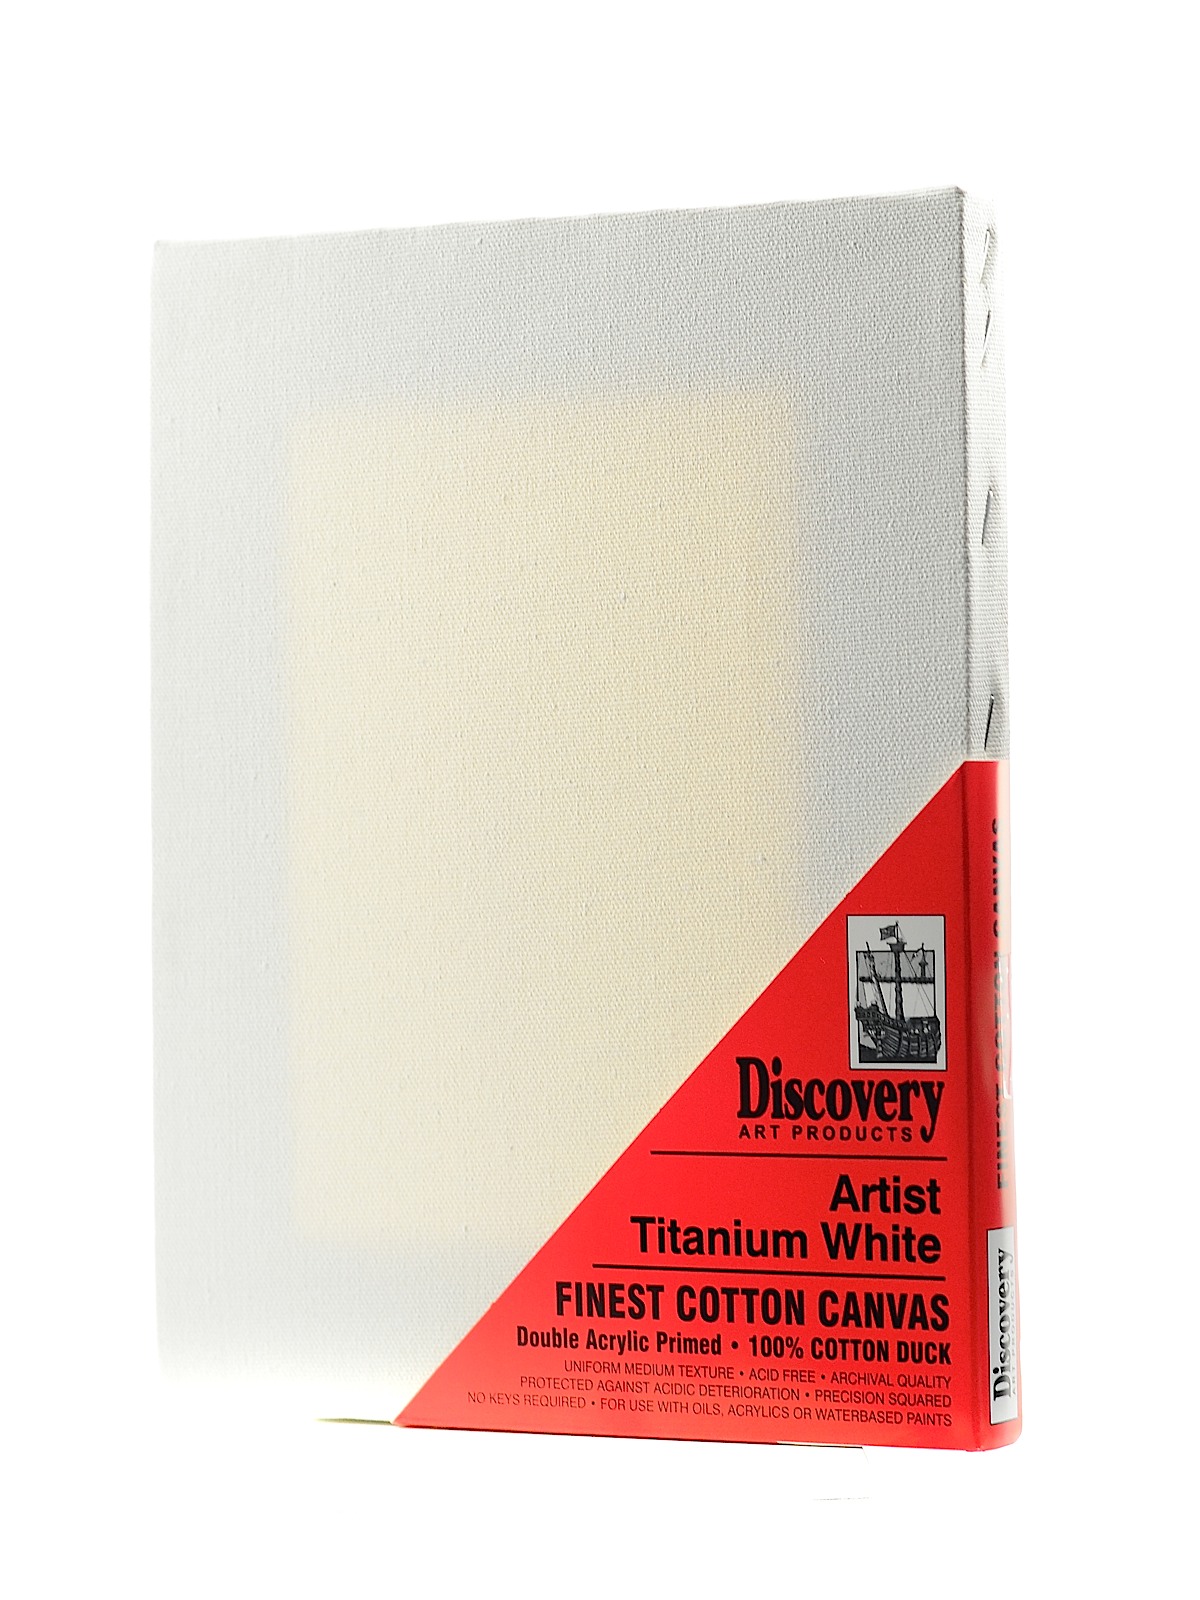 Finest Stretched Cotton Canvas White 6 In. X 8 In. Each